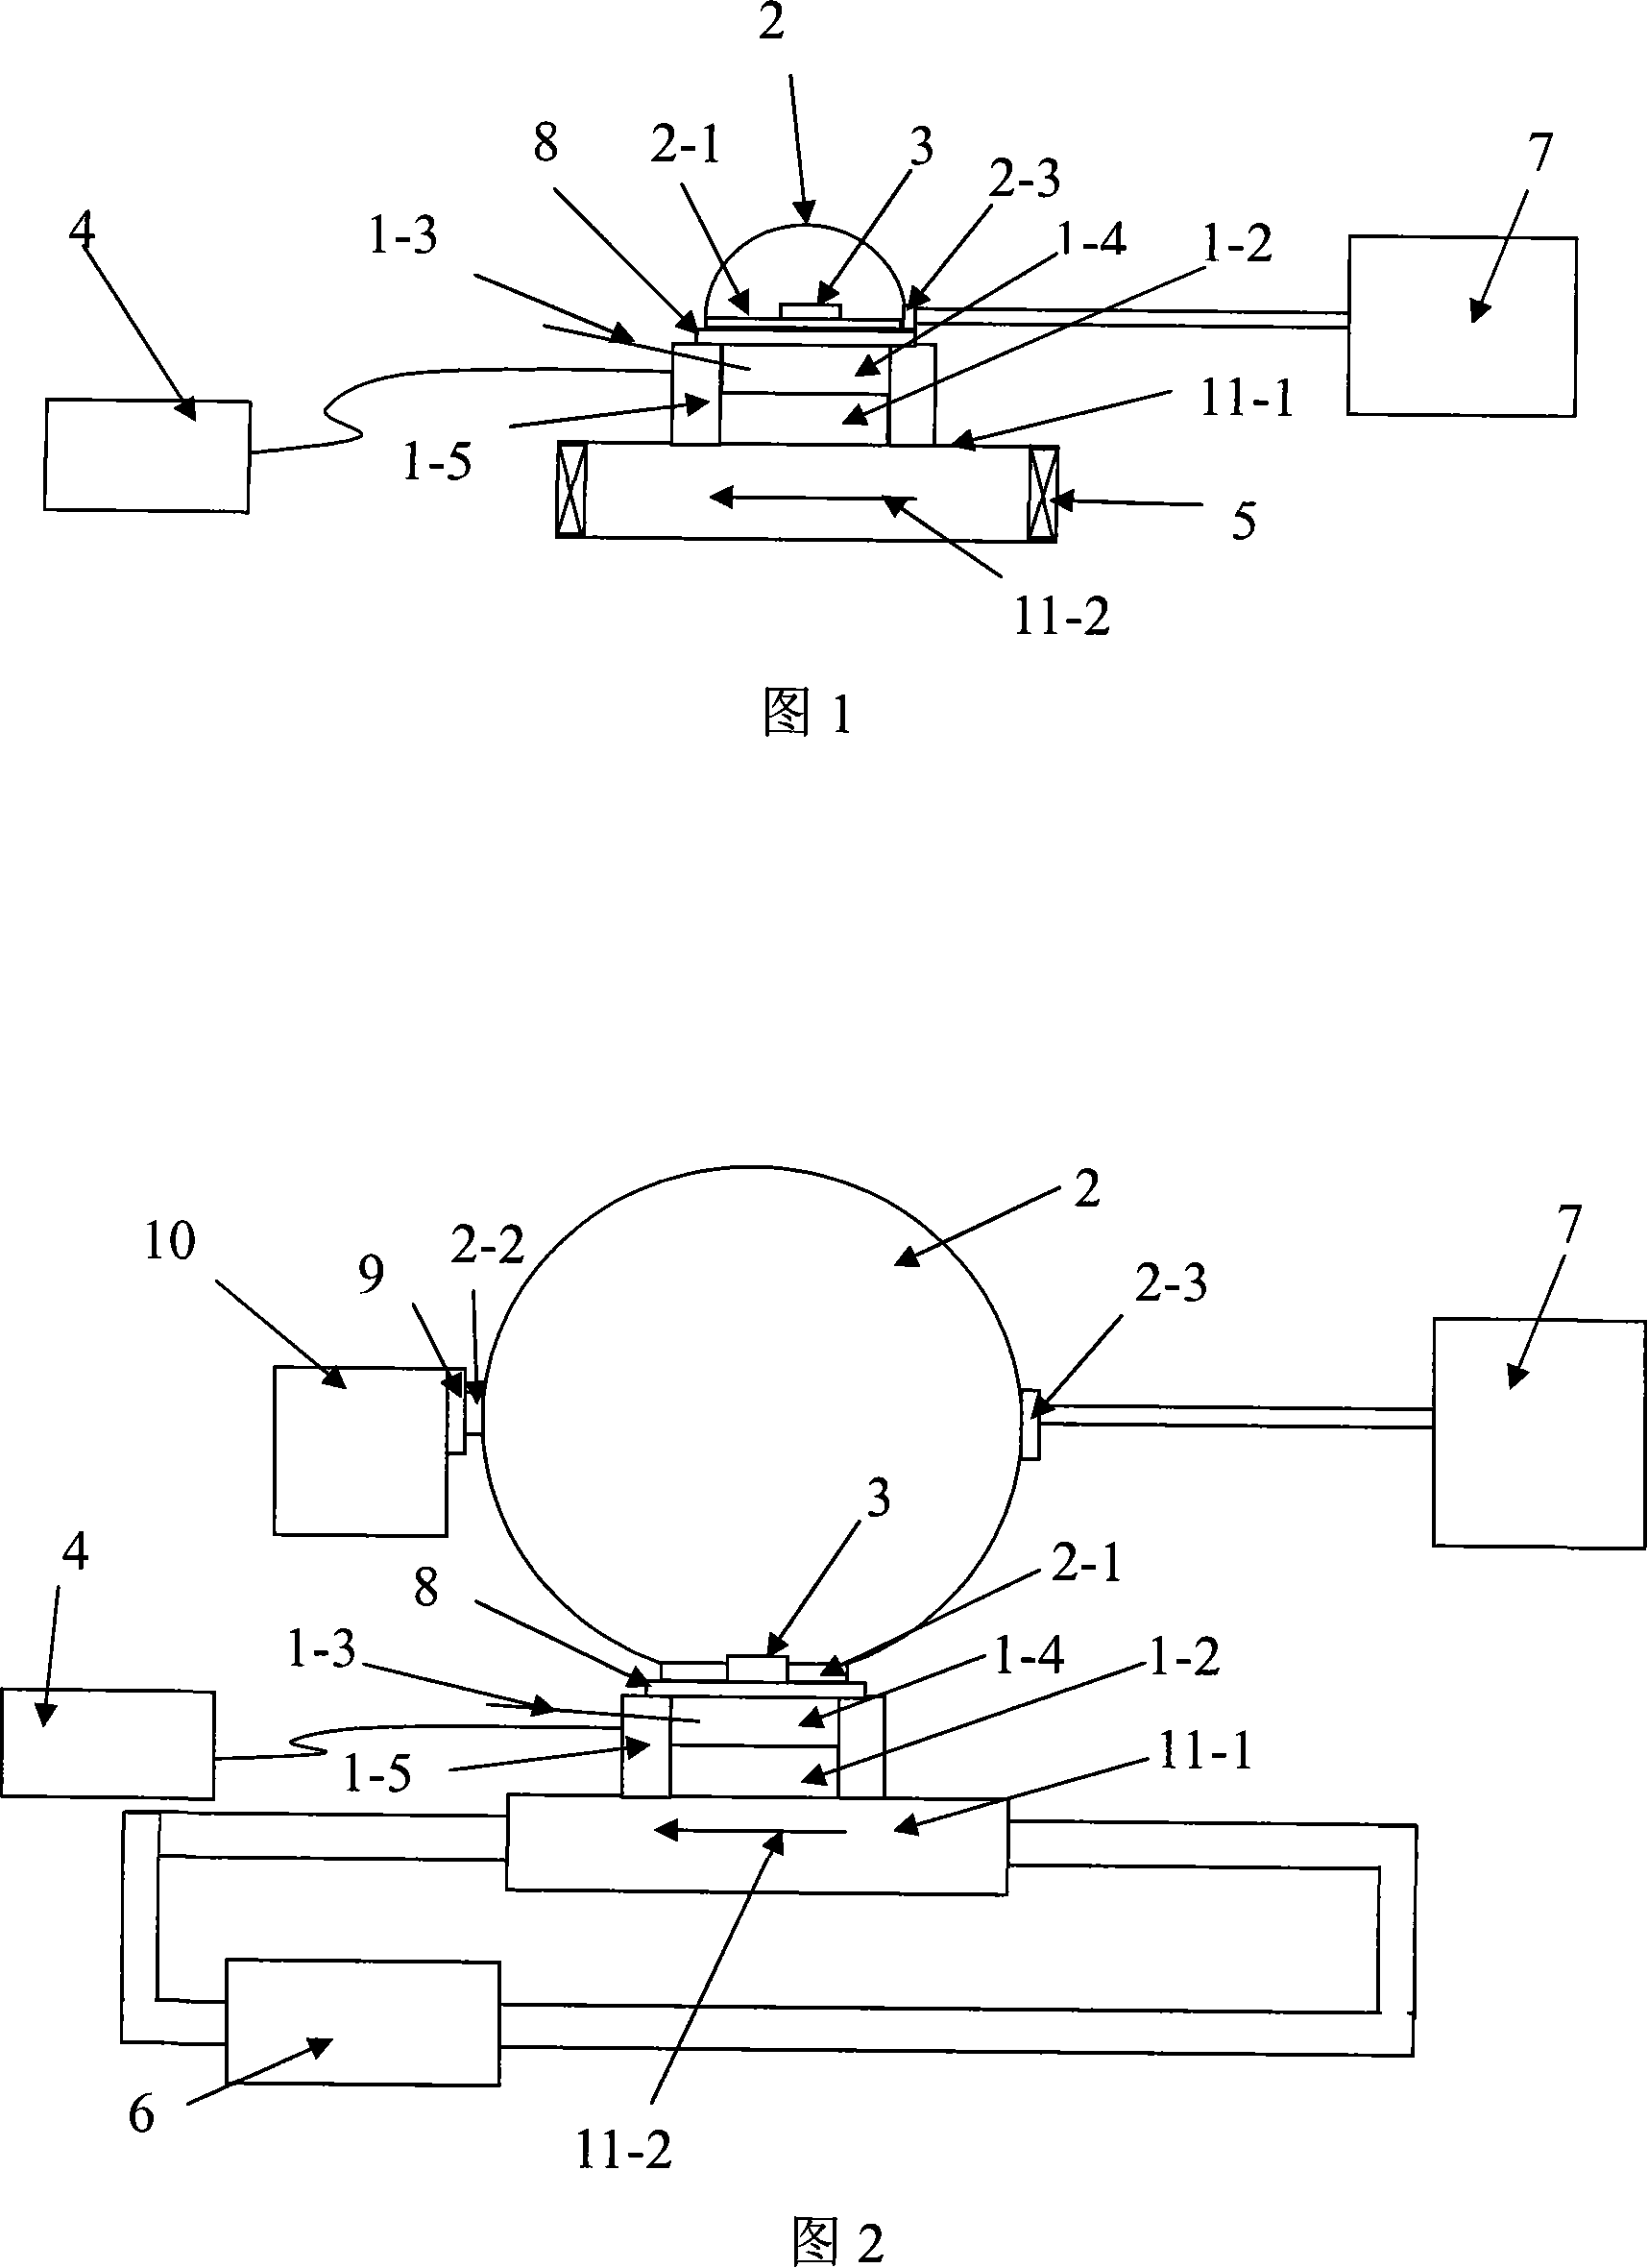 Temperature control base for measuring semiconductor light-emitting device